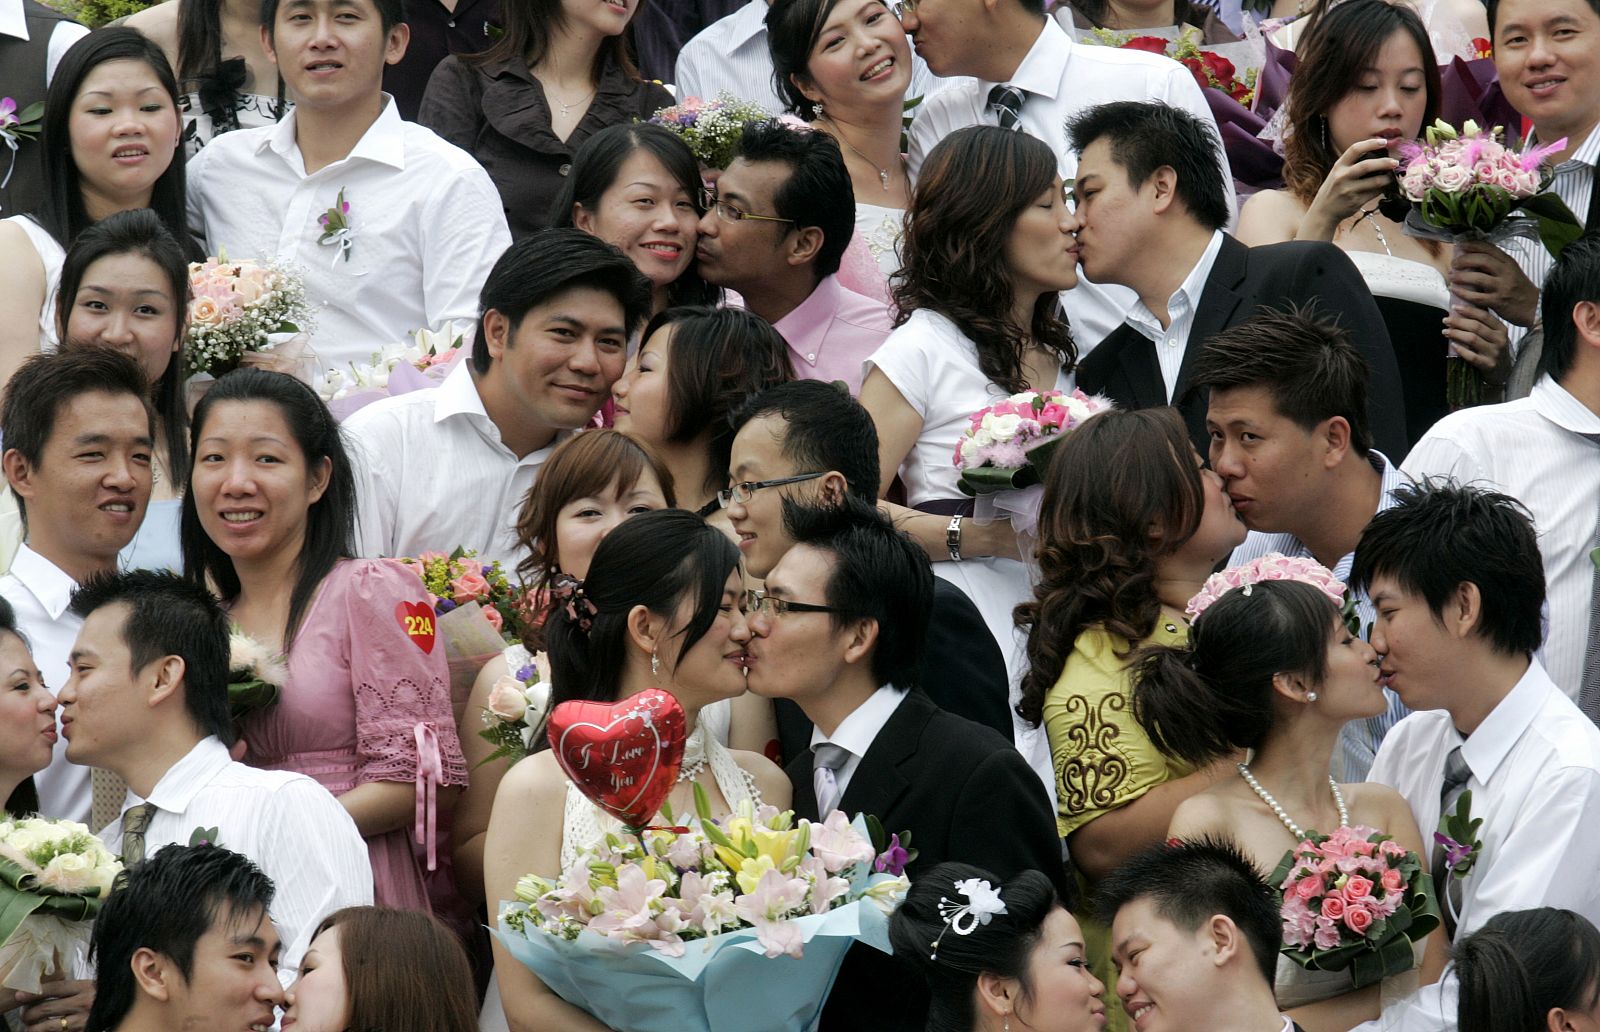 Ethnic Chinese Malaysians pose as they kiss for a group photo during their mass wedding ceremony, in conjunction with the date 08.08.08, in Klang